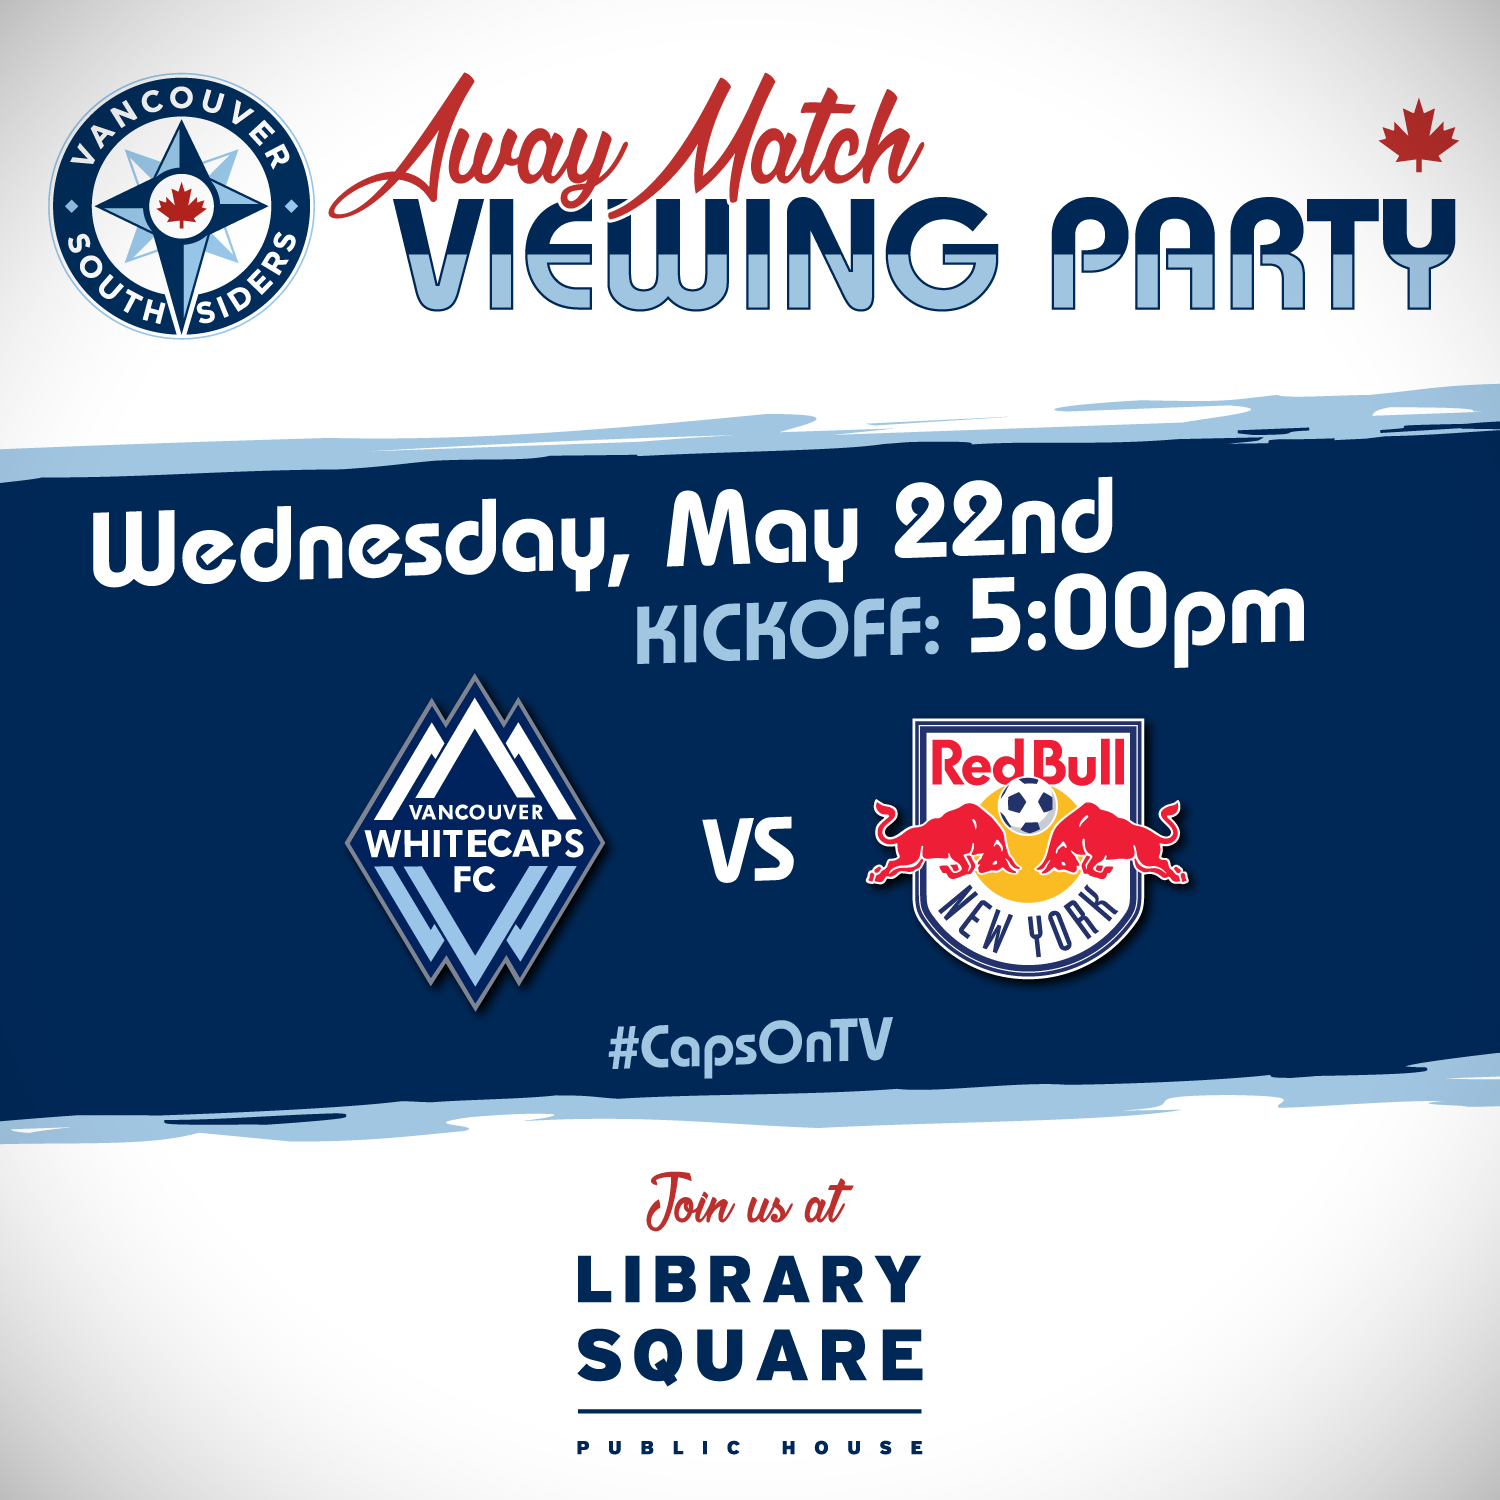 Away match viewing party vs NYRB at Library Square Wednesday, May 22nd, Kickoff 5:00pm